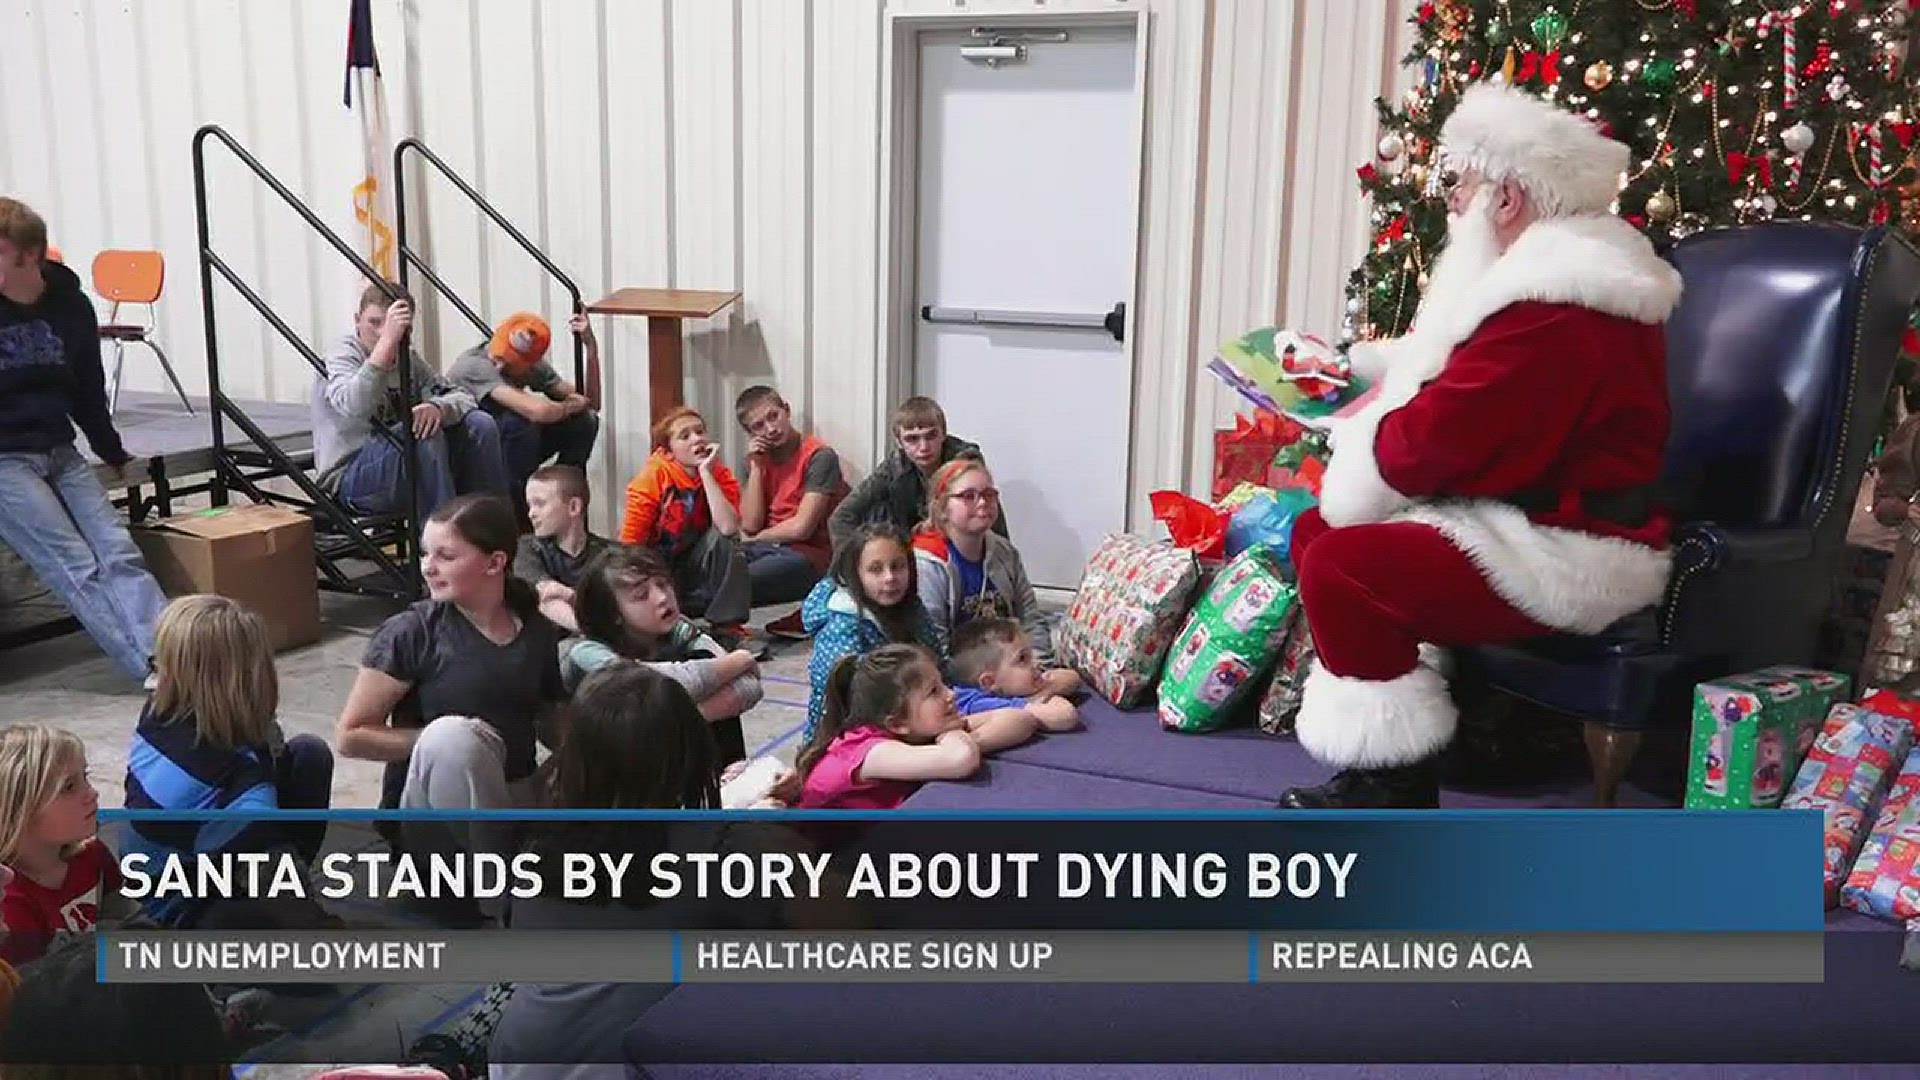 Dec. 14, 2016: A Santa who granted a dying boy his wish is addressing concerns about his story, and his wife is sharing her account of that emotional experience.